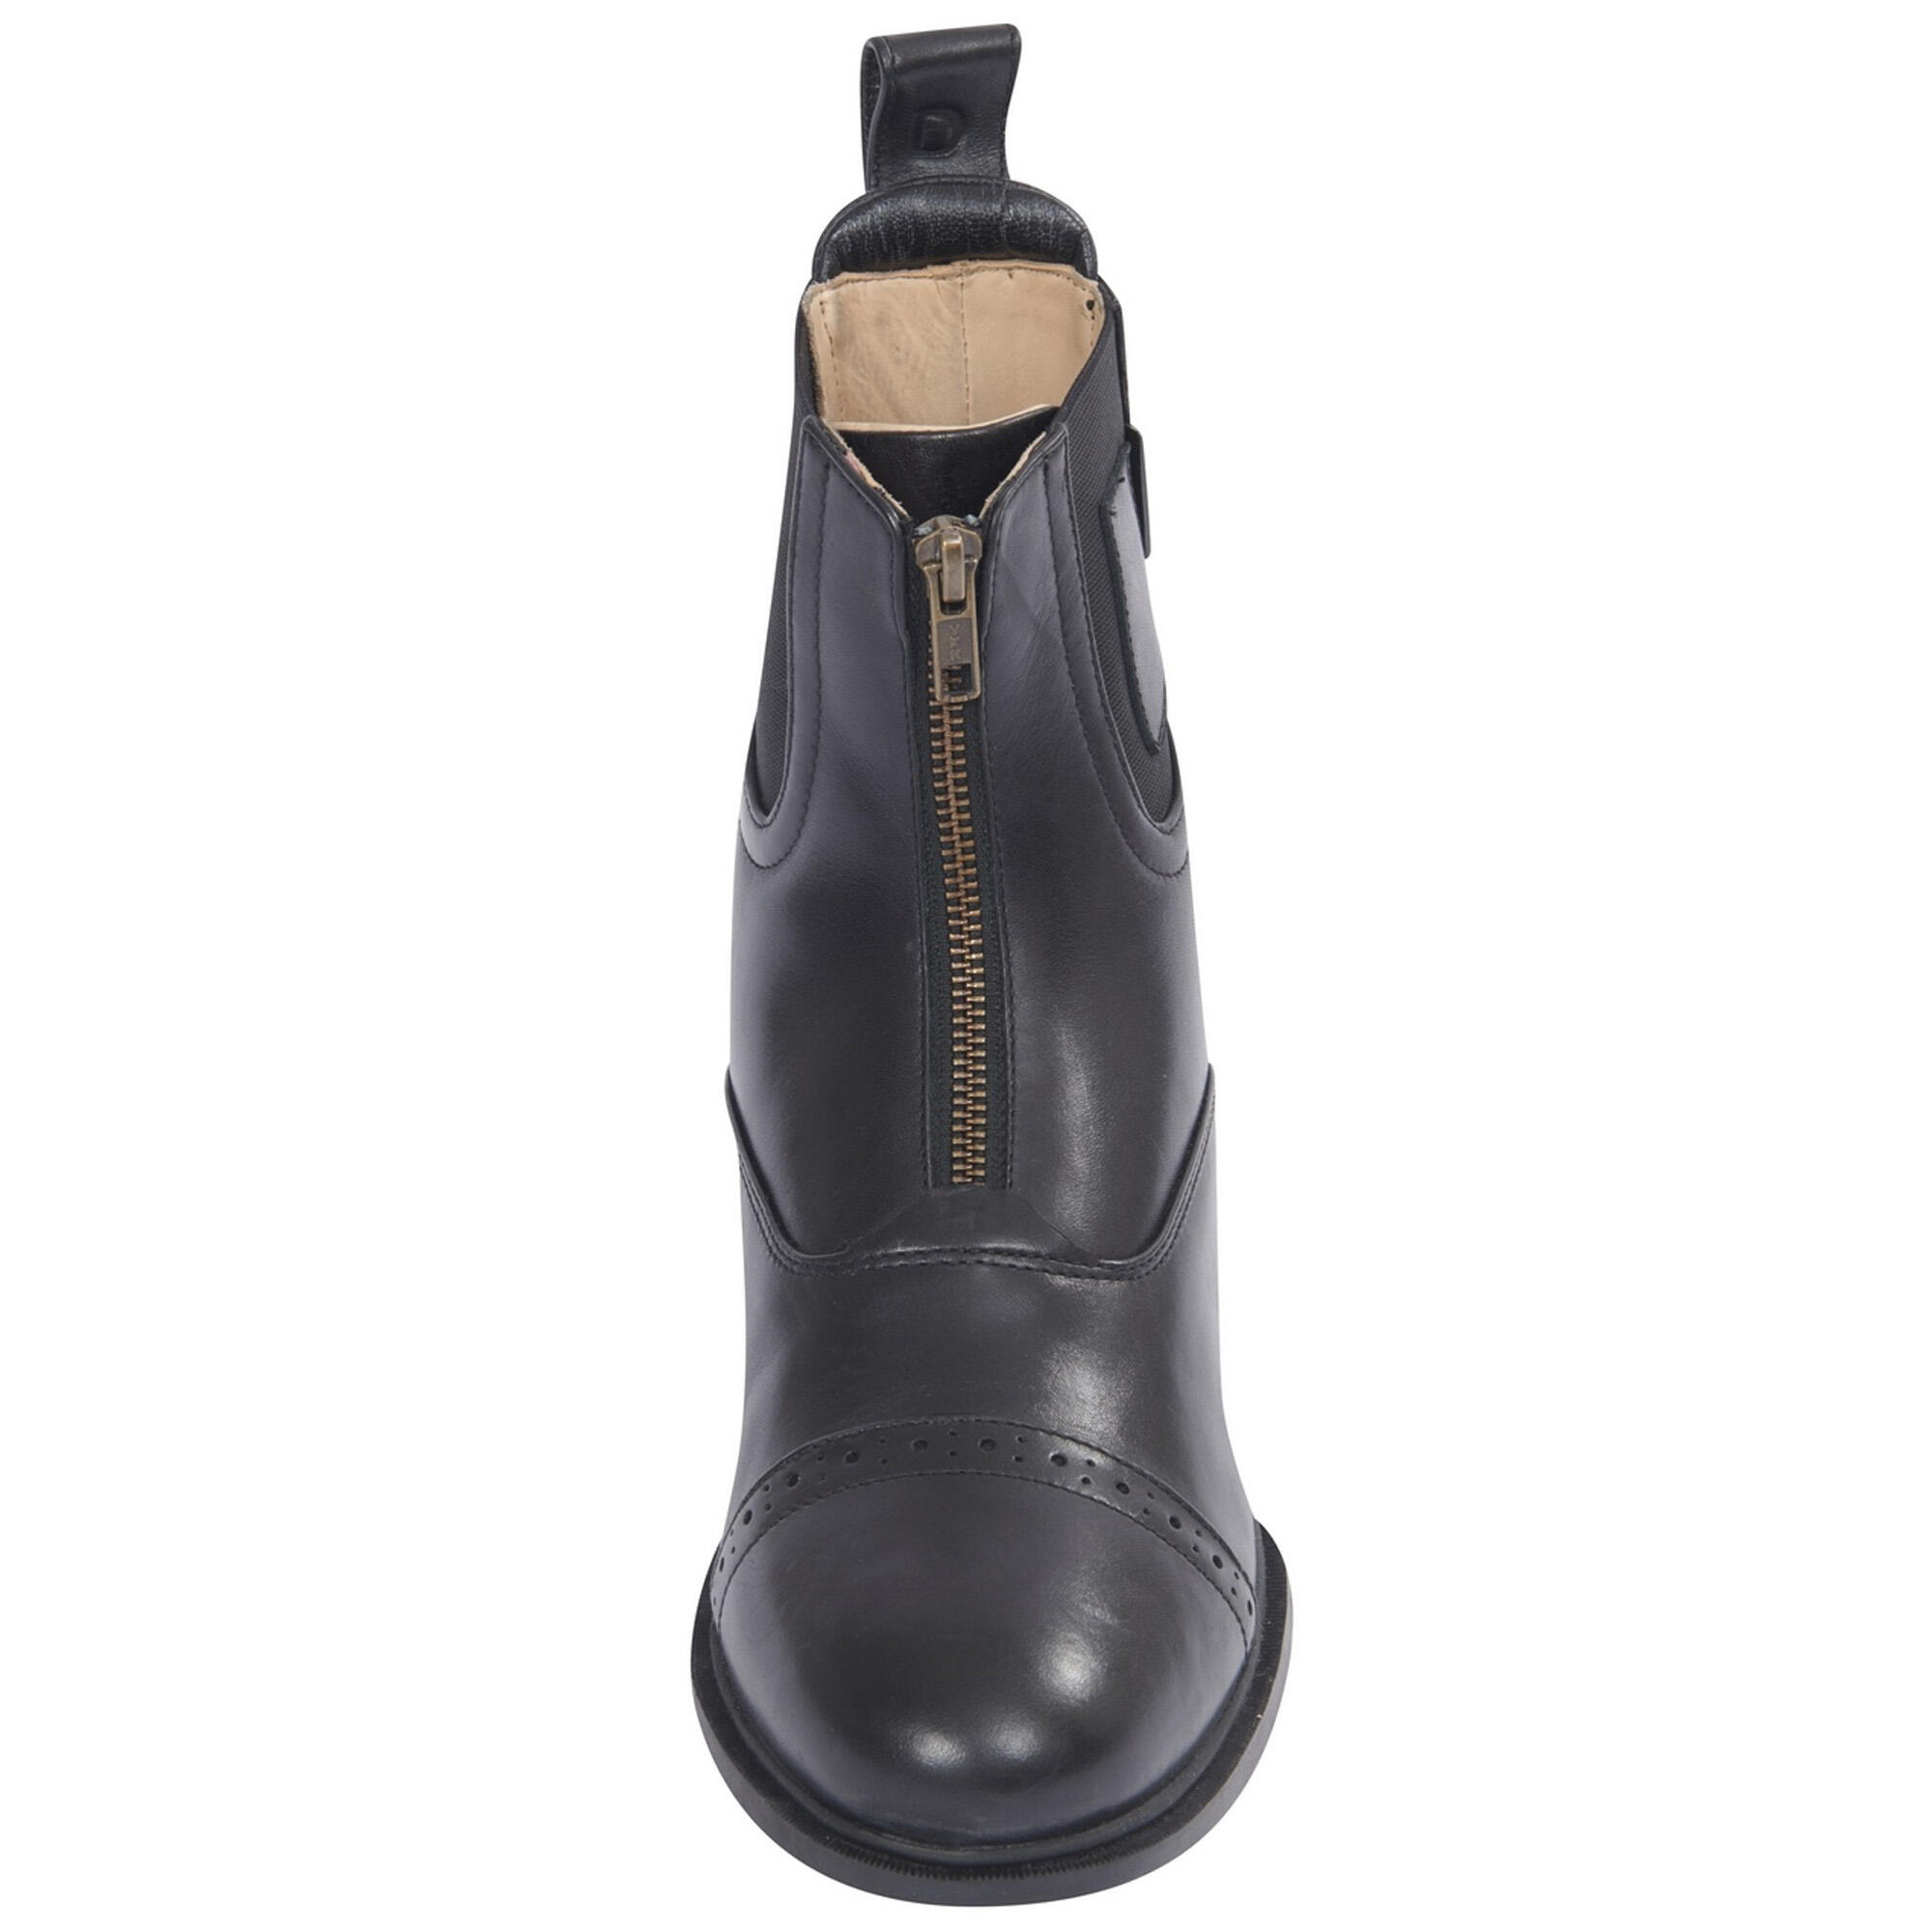 DUBLIN Evolution Adults Zip Front Leather Paddock Boots (Black)